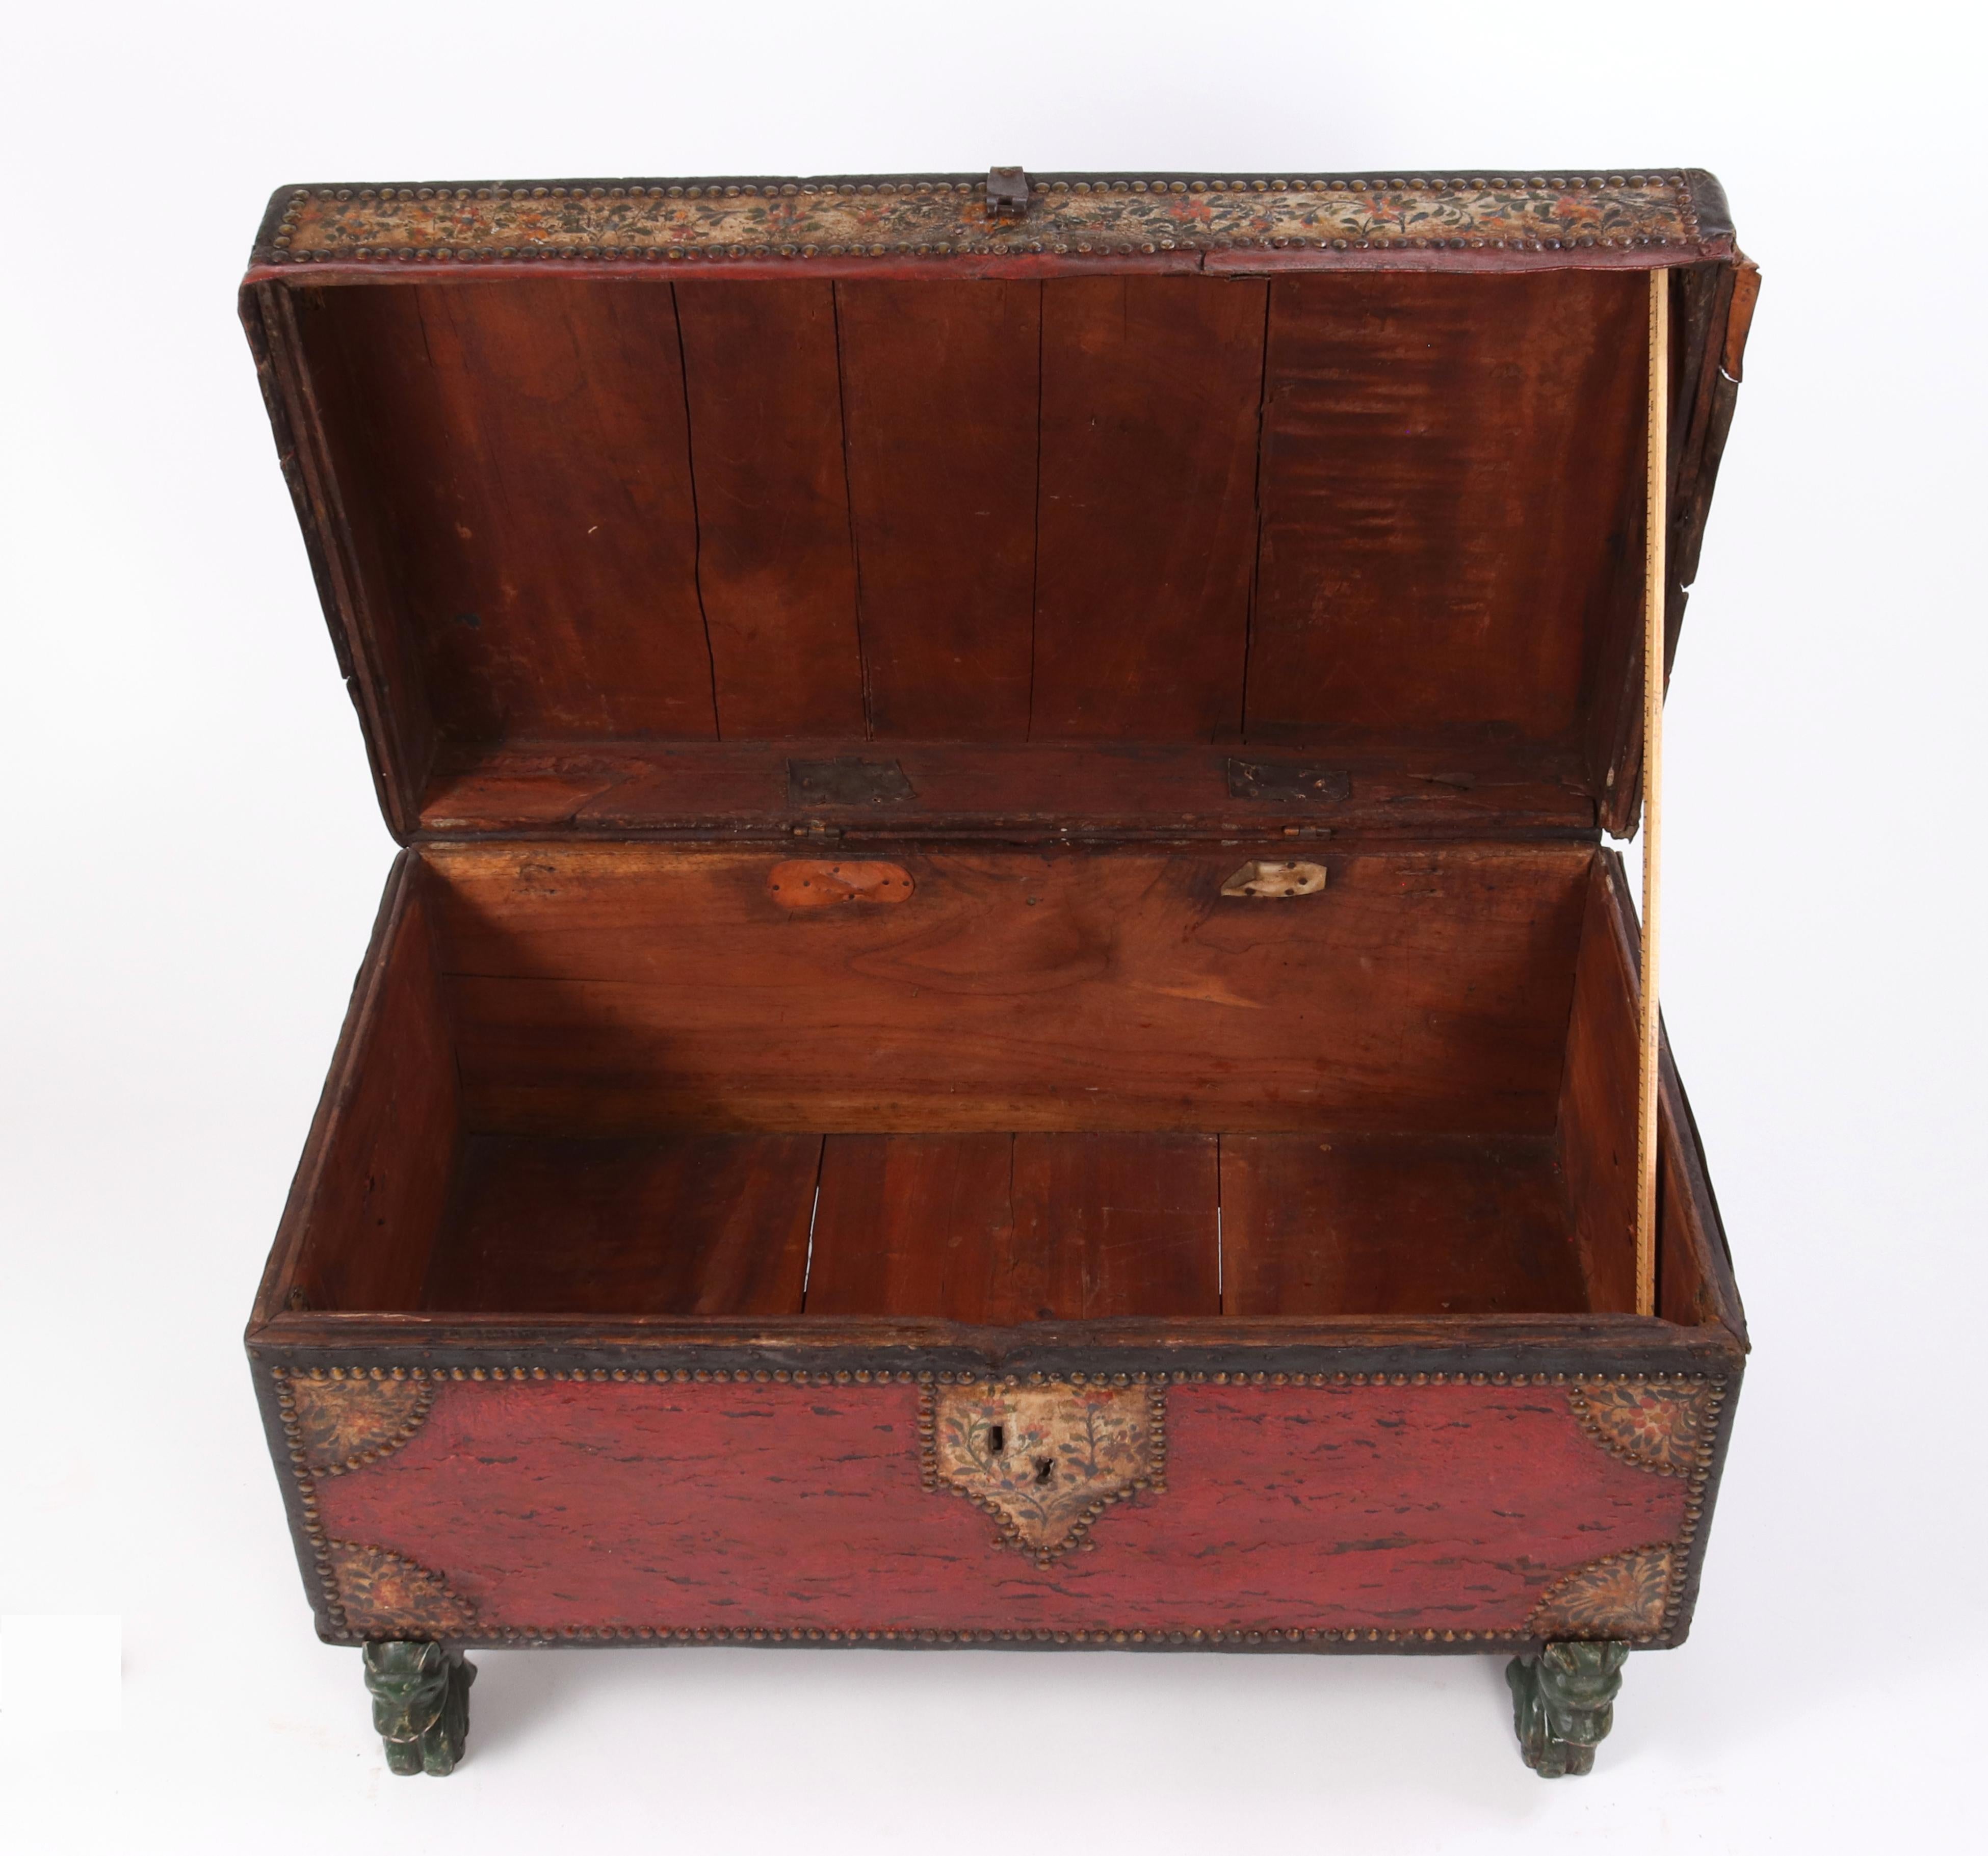 Chinese Export Leather Trunk, circa 1820 For Sale 1